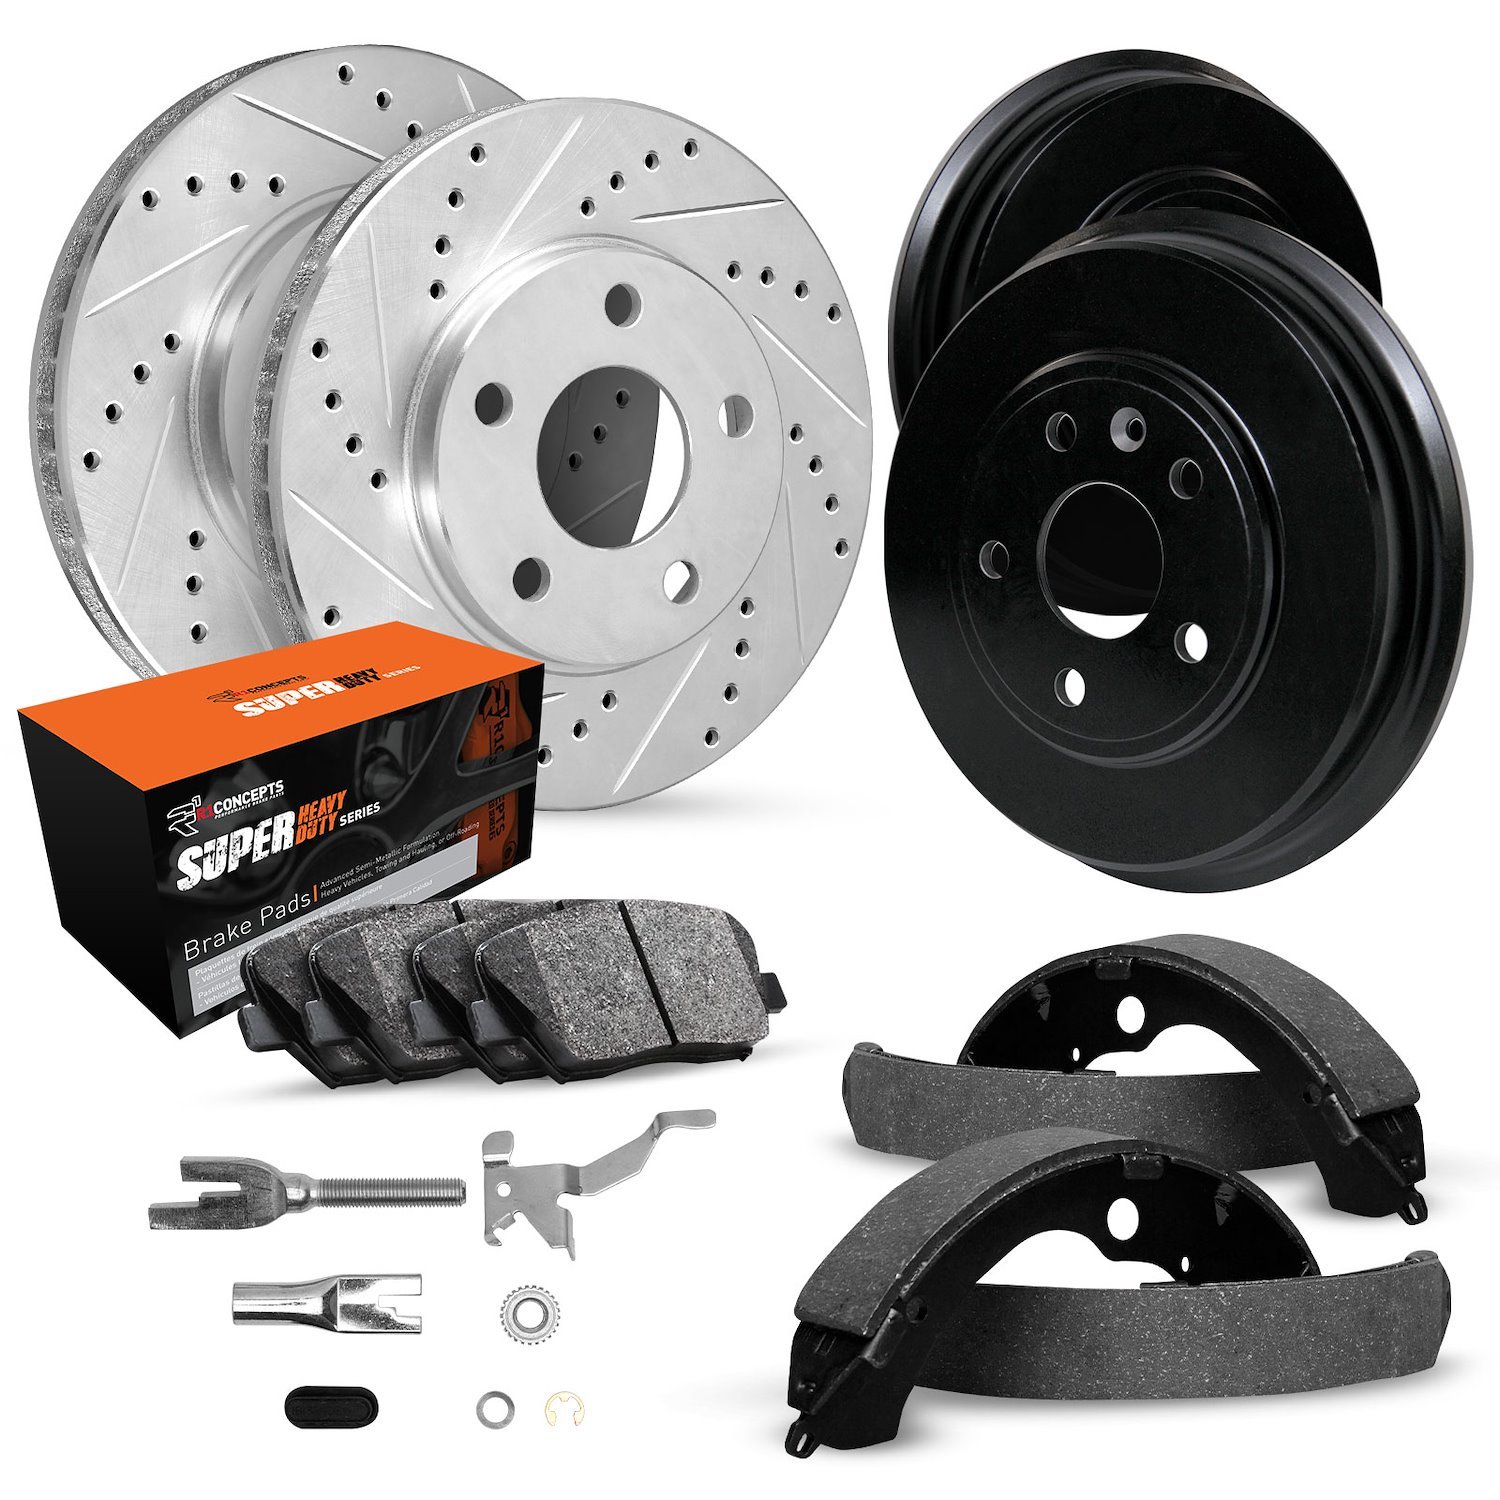 E-Line Drilled & Slotted Silver Brake Rotor & Drum Set w/Super-Duty Pads, Shoes, & Adjusters, 1974-1996 GM